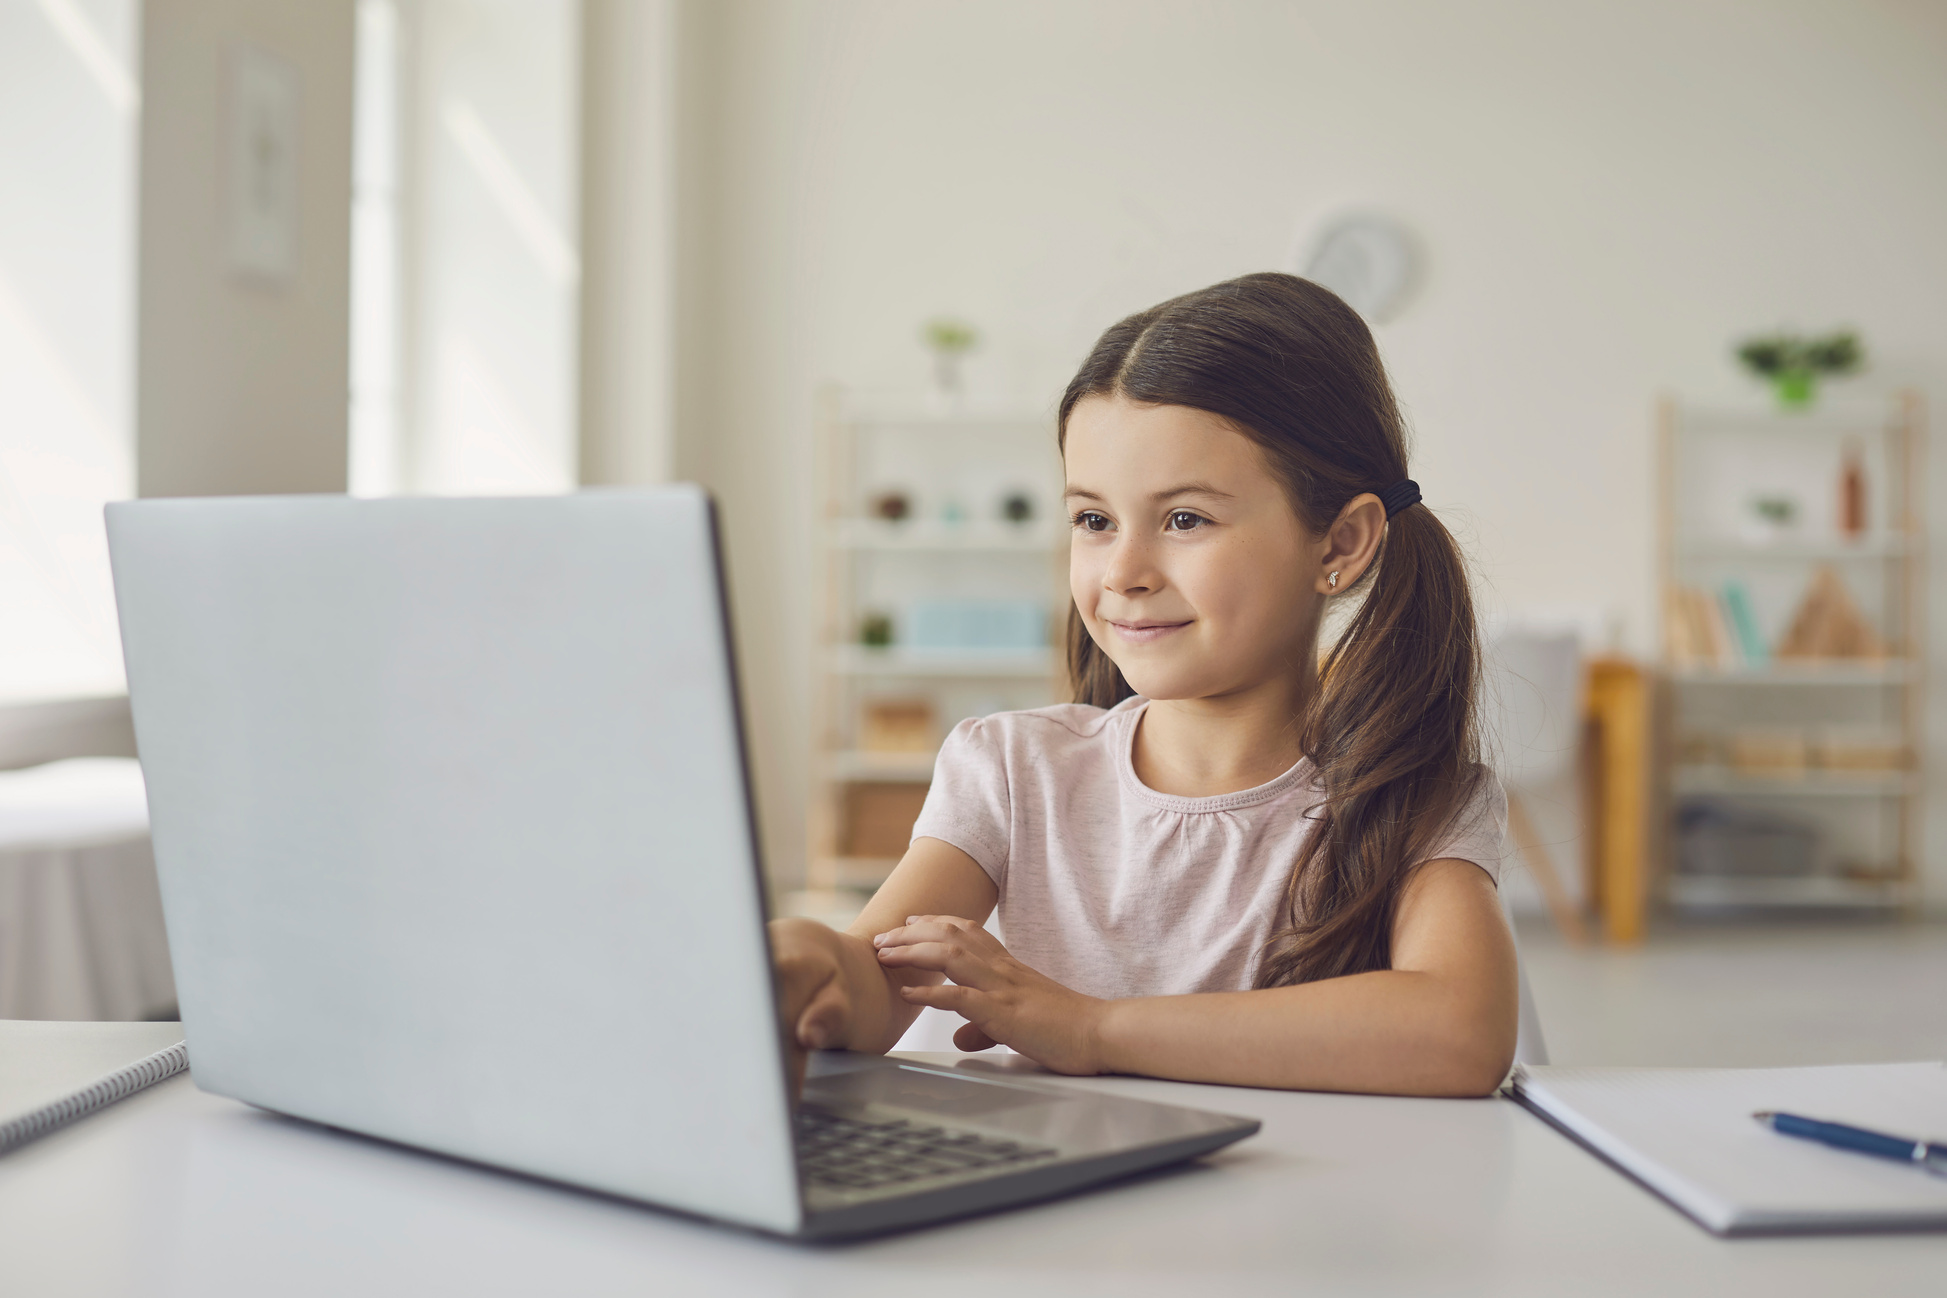 Smiling Girl Learning Online at Laptop from Home